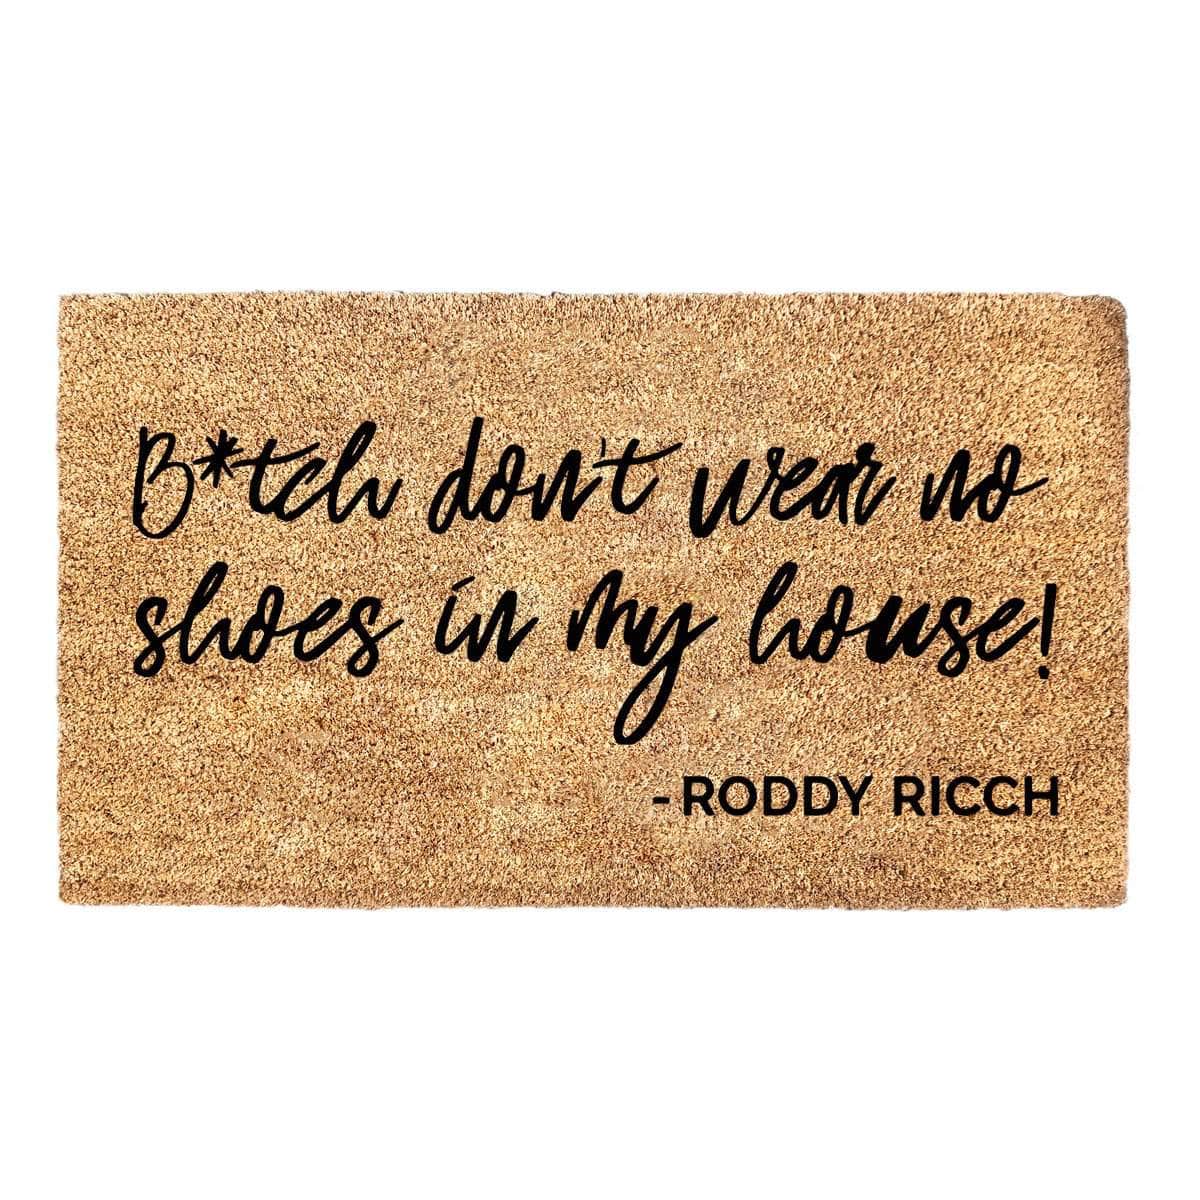 B*tch don't wear no shoes in my house - Roddy Ricch Doormat